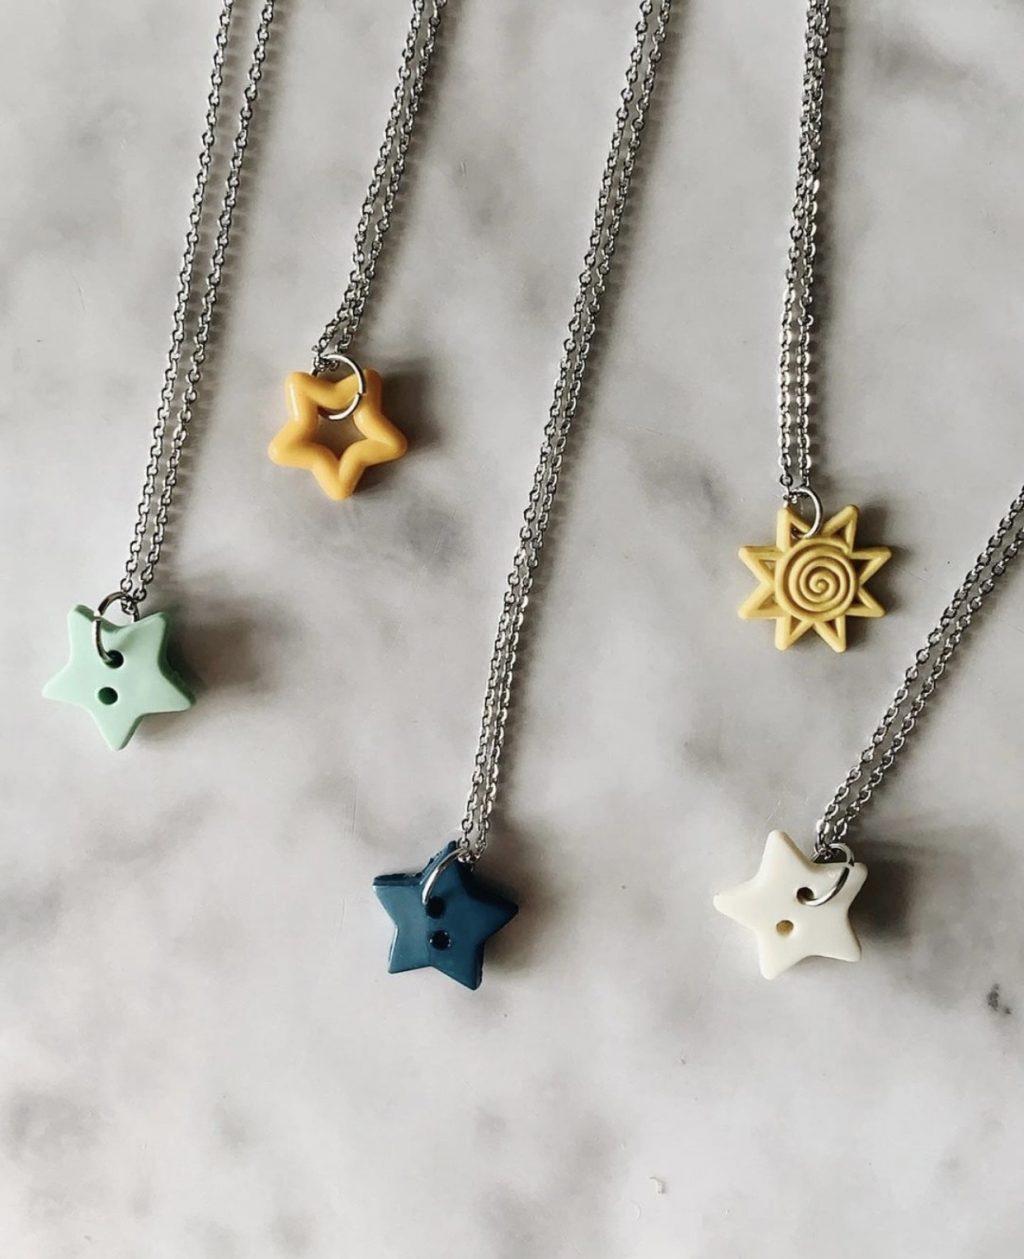 Tyler's newest necklaces include star and sun repurposed button charms, featured on her Etsy since December. Tyler said many Pepperdine students and friends have supported her business, and she is excited to watch it blossom.